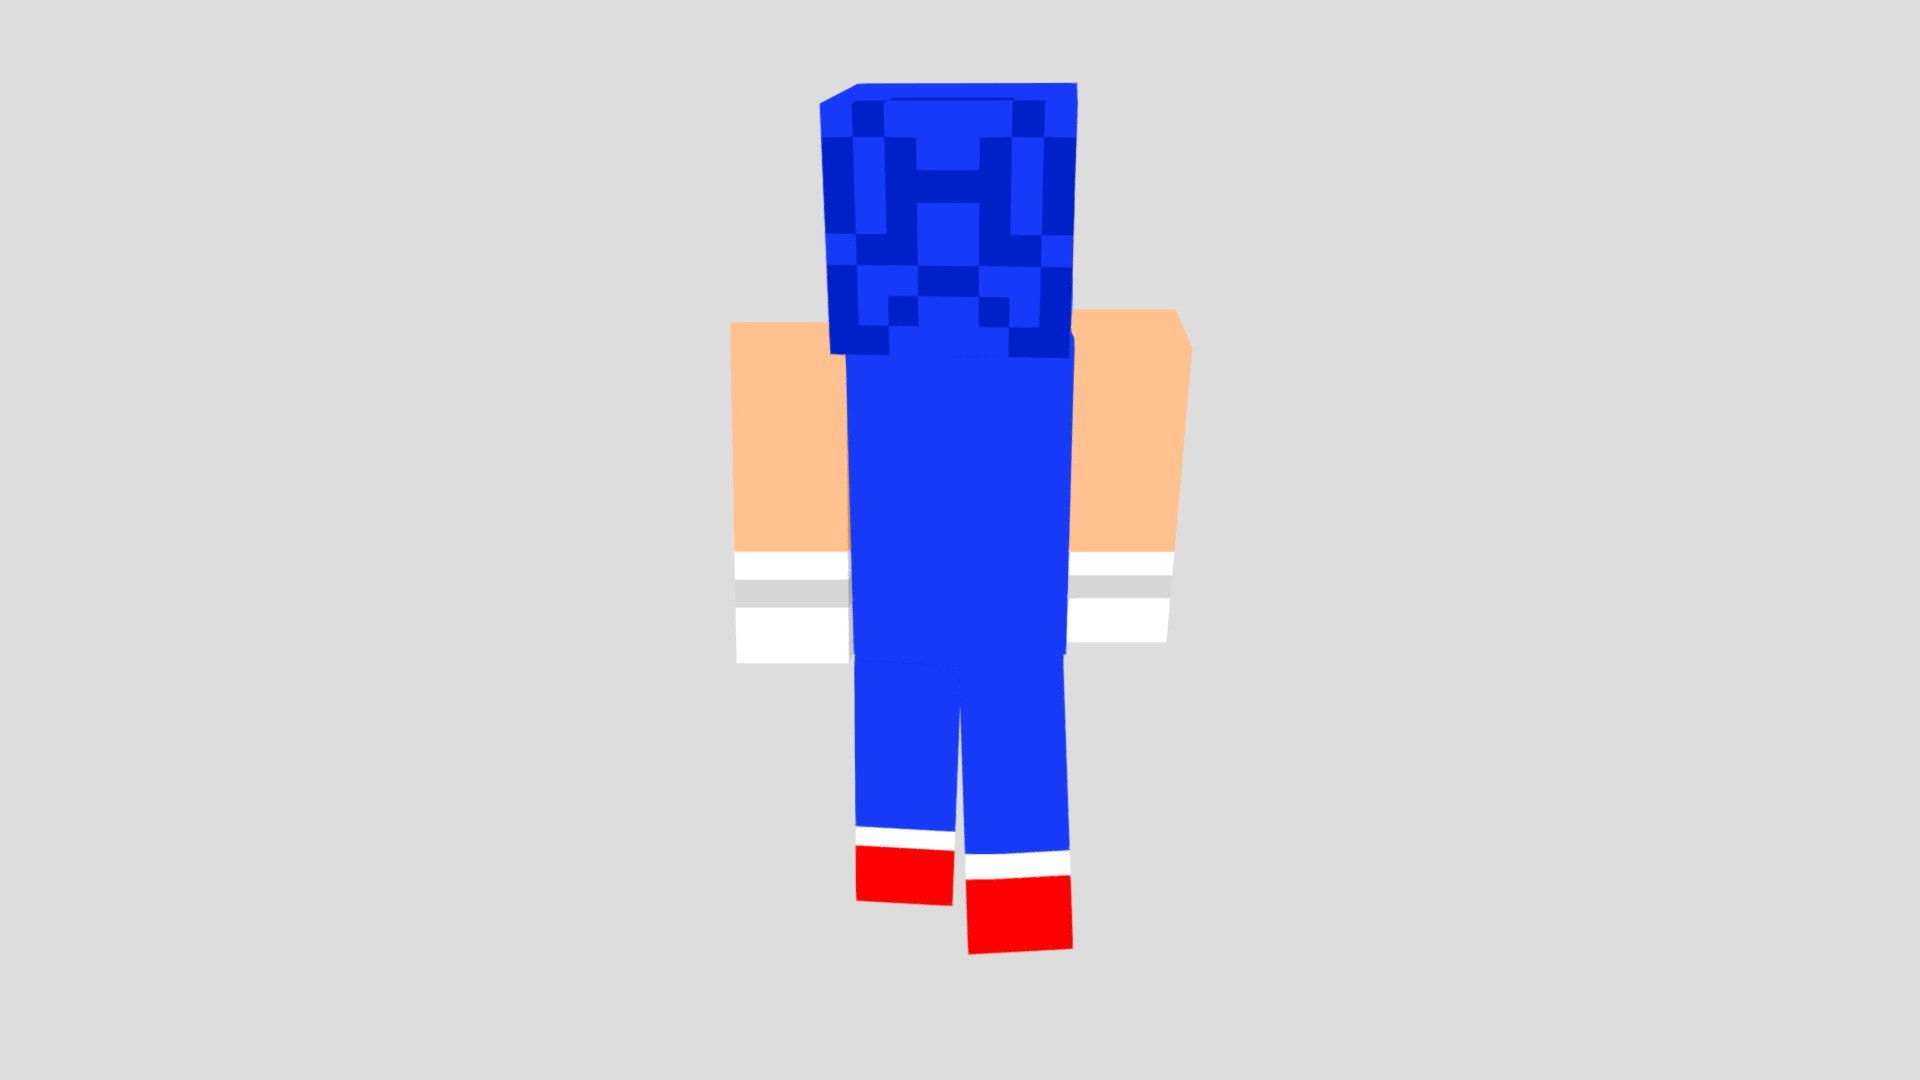 Minecraft Player [1.7 skin type] - Download Free 3D model by